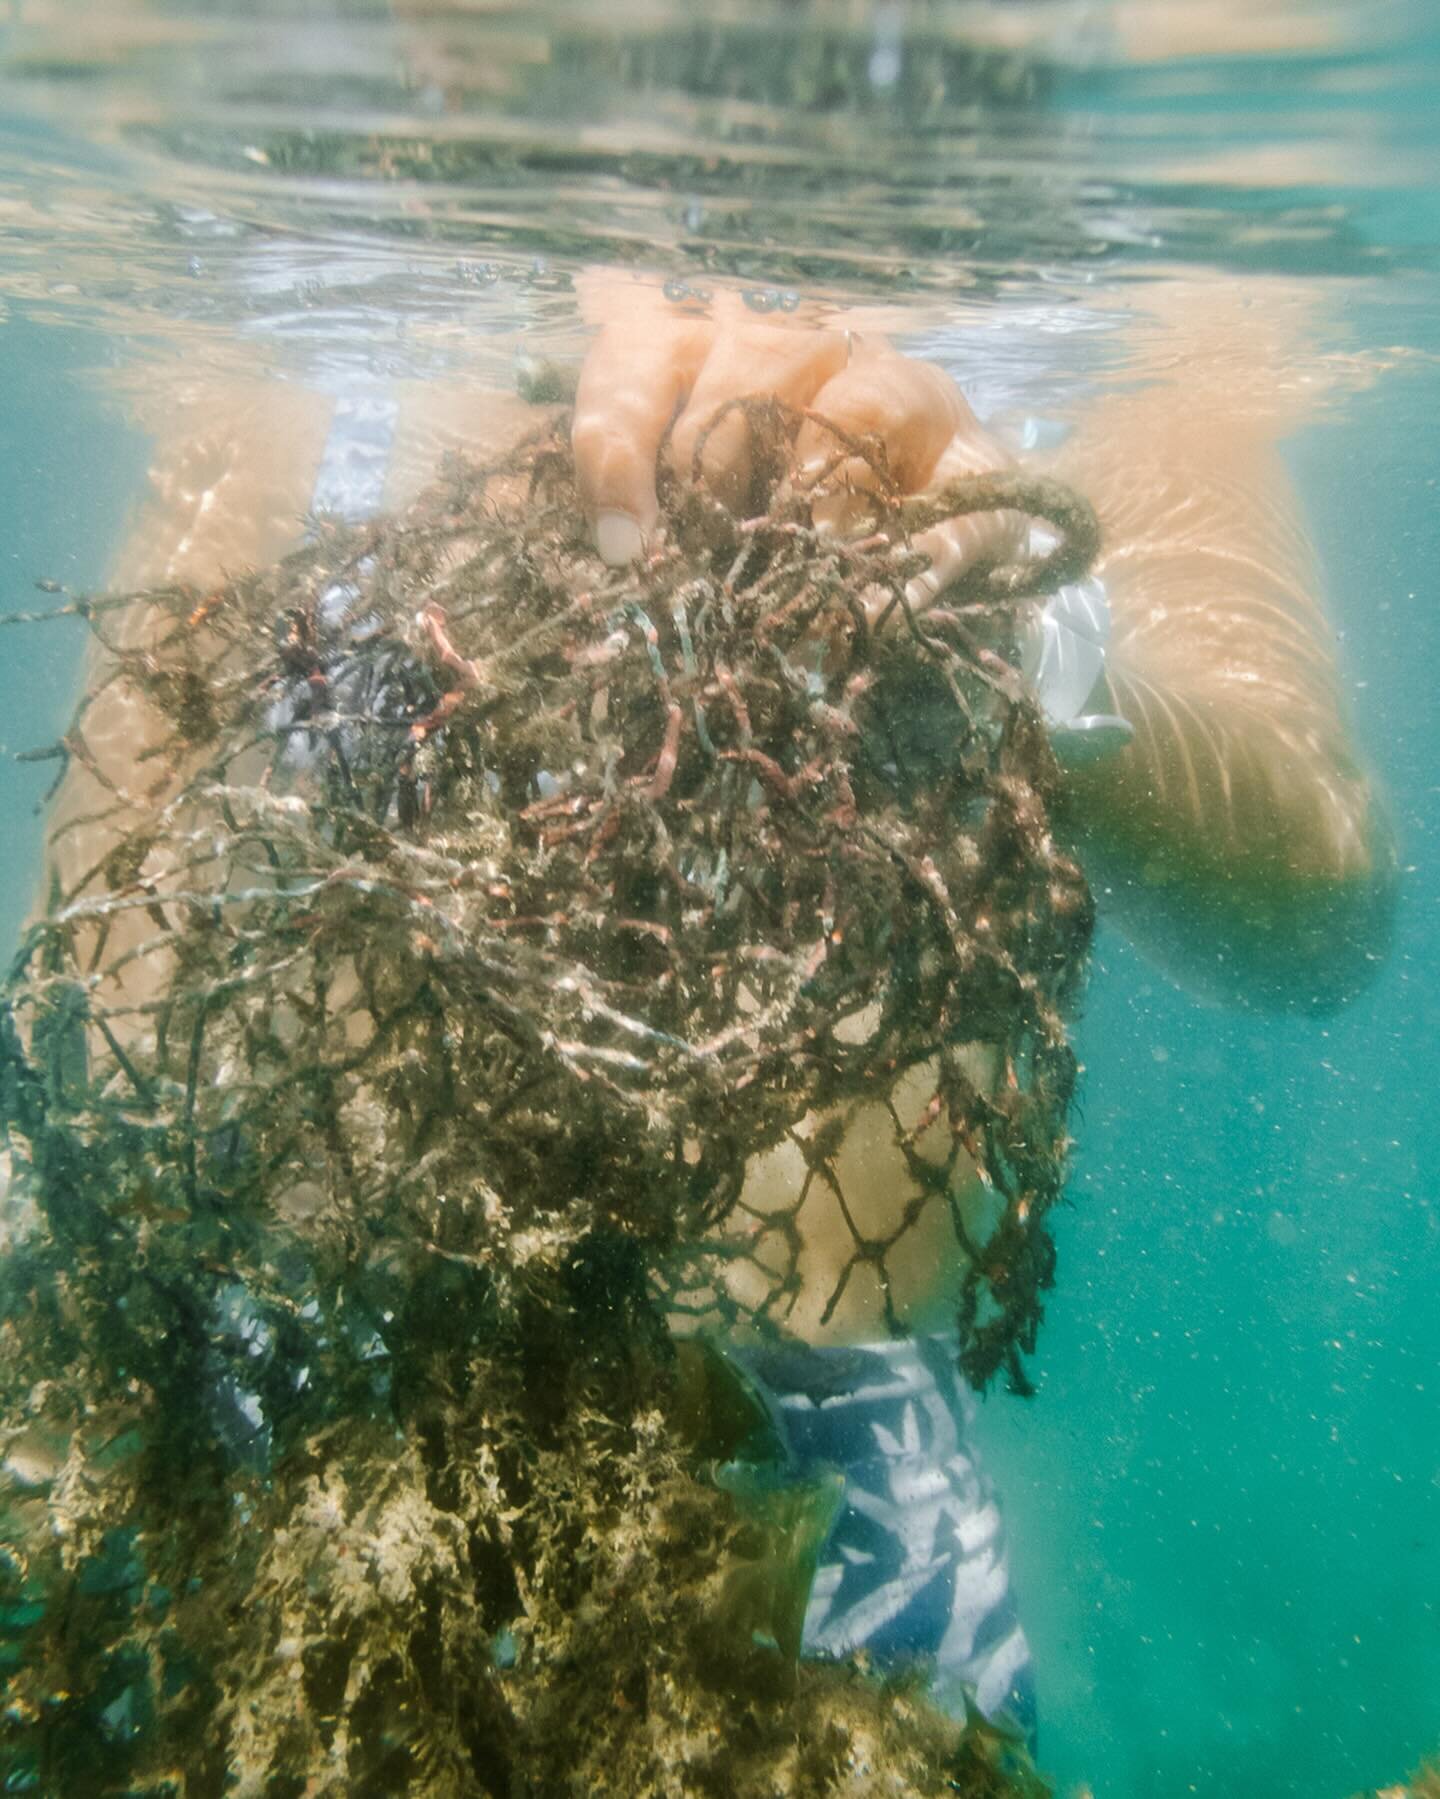 Ghost gear. 

Otherwise known as ALDFG: Abandoned, Lost or Discarded Fishing Gear.

🎣 Abandoned &ndash; gear that has become stuck at sea during deployment or at an irretrievable depth on the seafloor, and gets left behind; 🎣 Lost &ndash; when a de